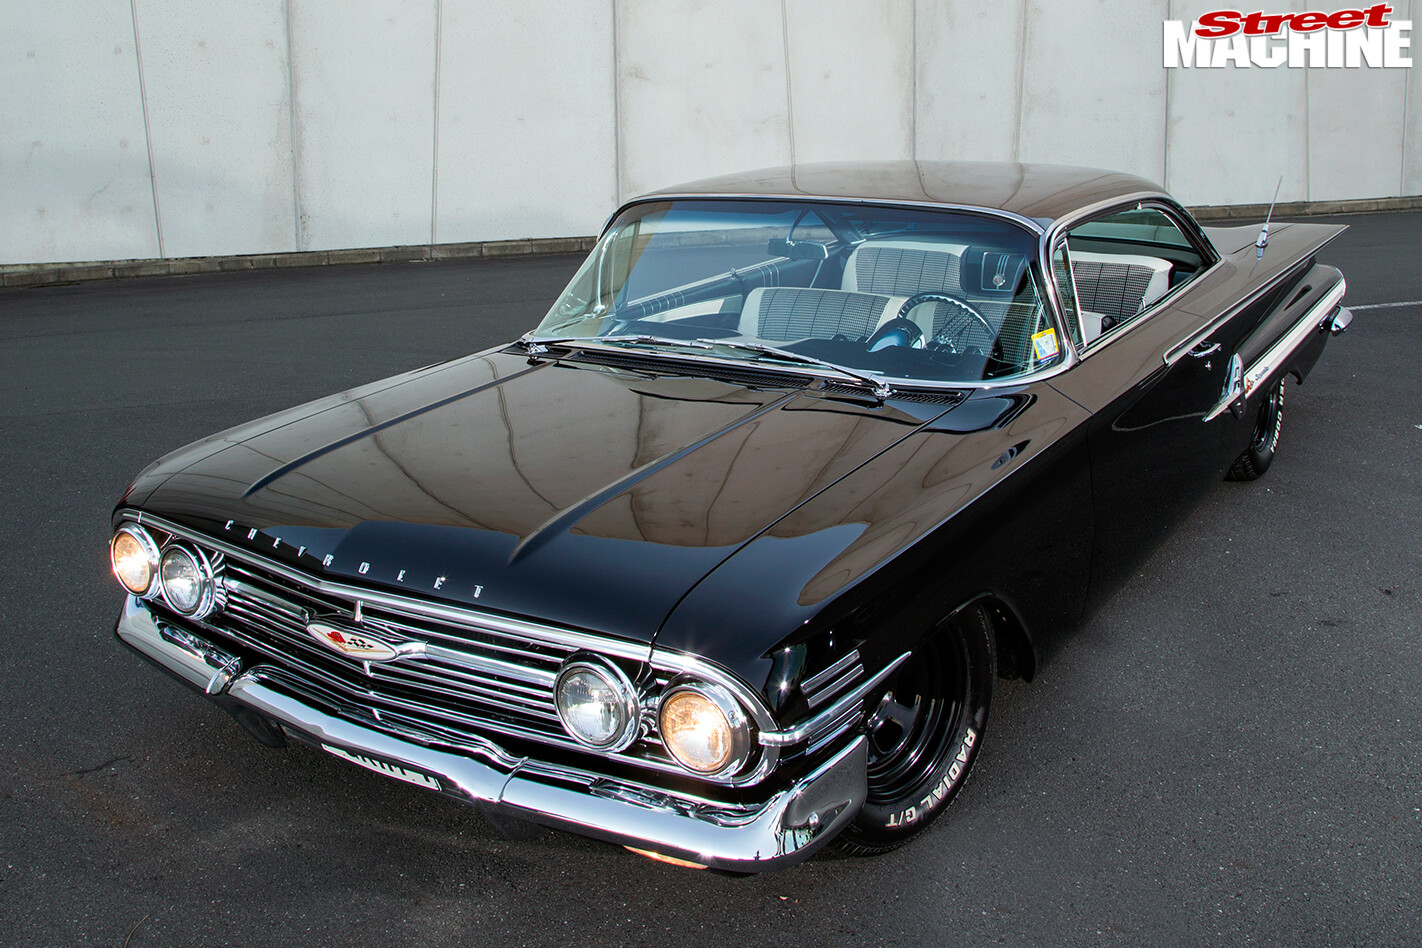 Chevrolet -impala -front -top -view